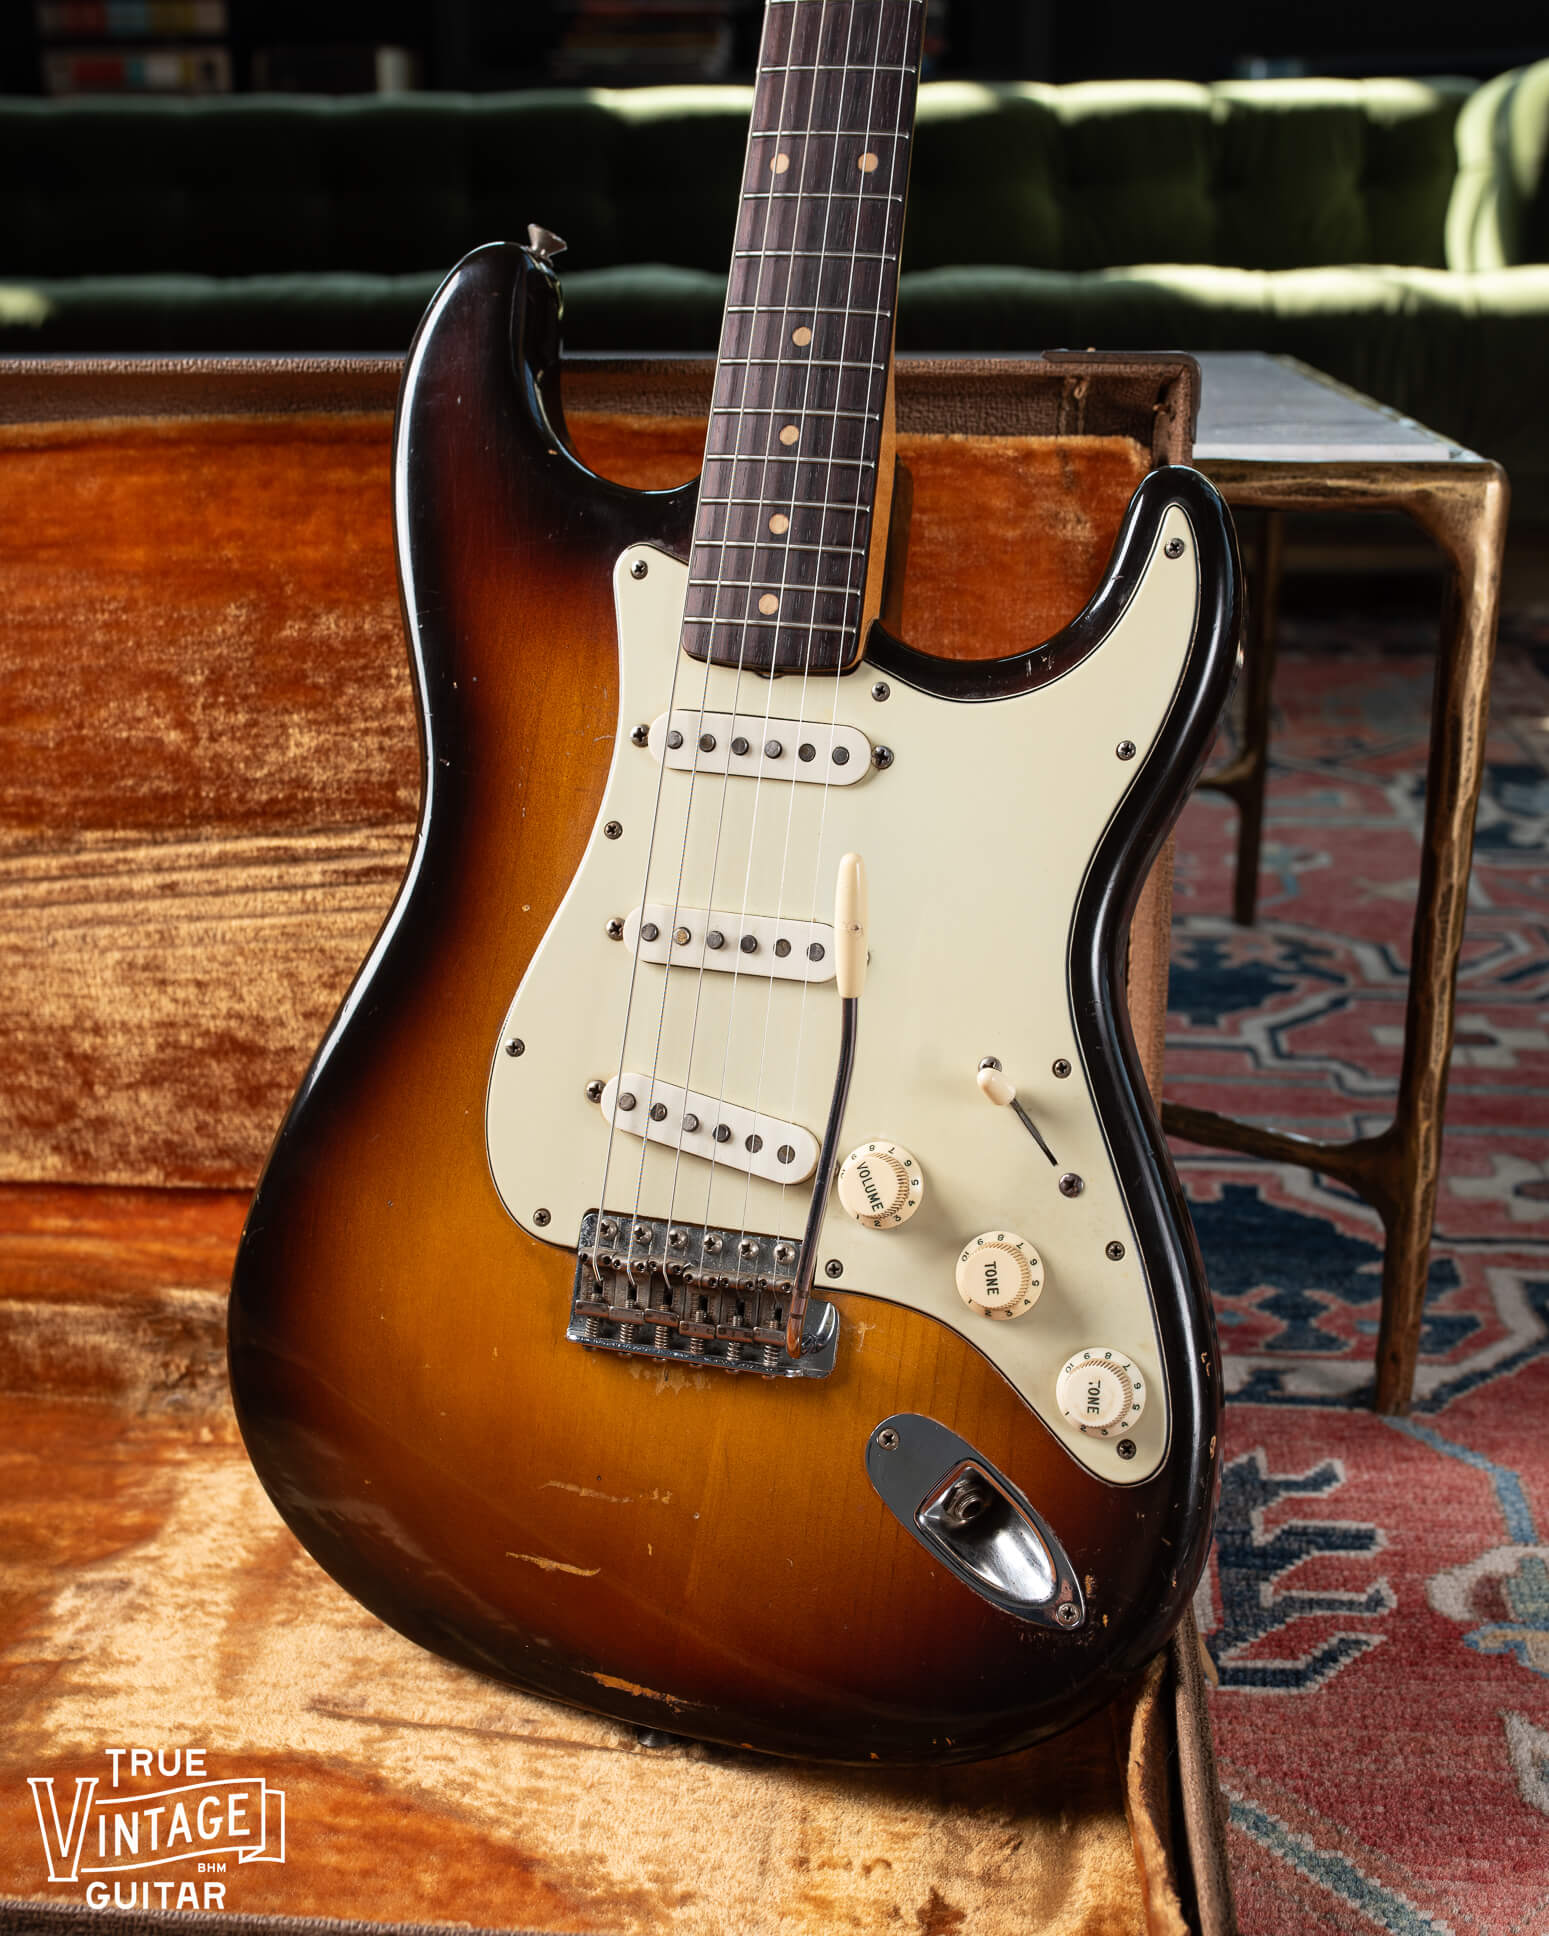 1959 Stratocaster with three layer nitrate pickguard